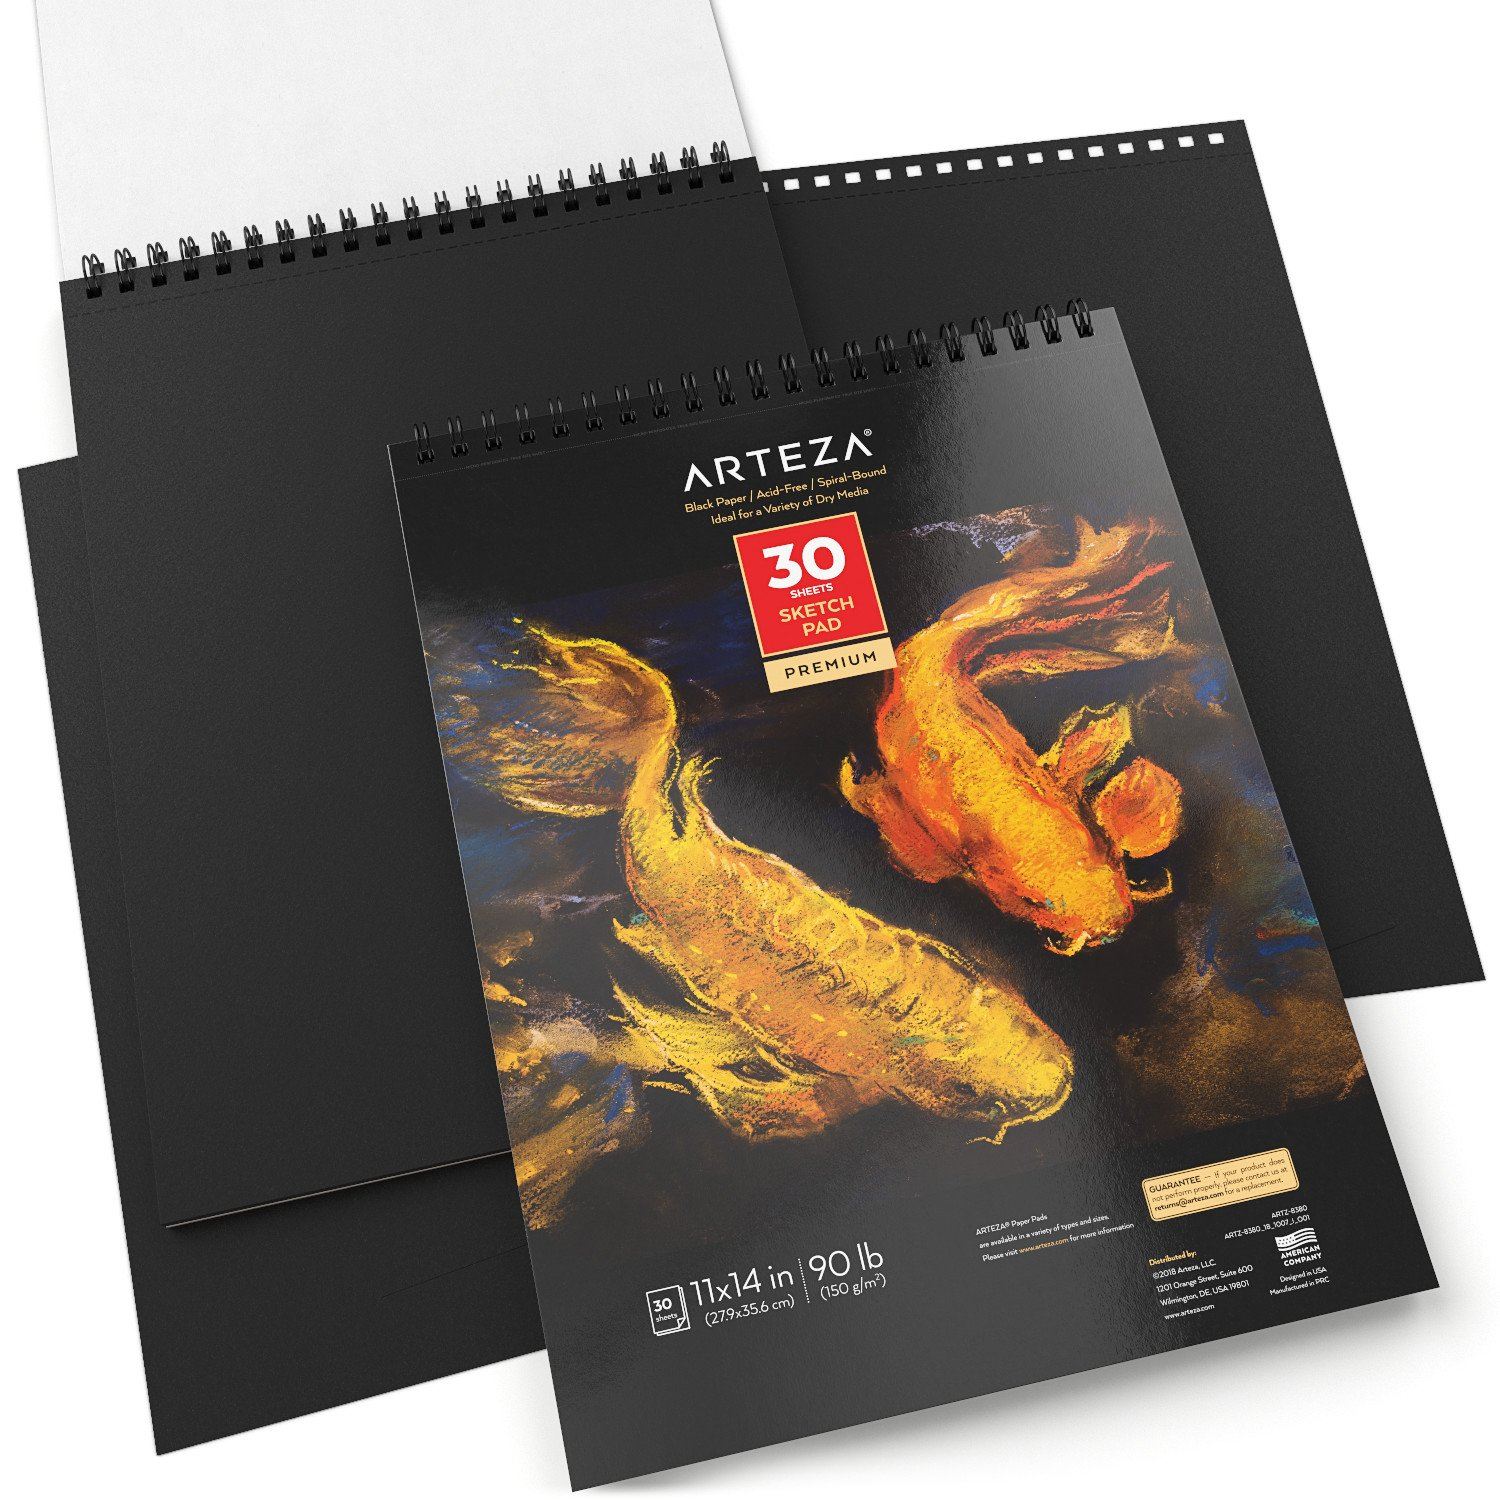 Large 11 x 14 Inch Paper Sketch Pad Review 